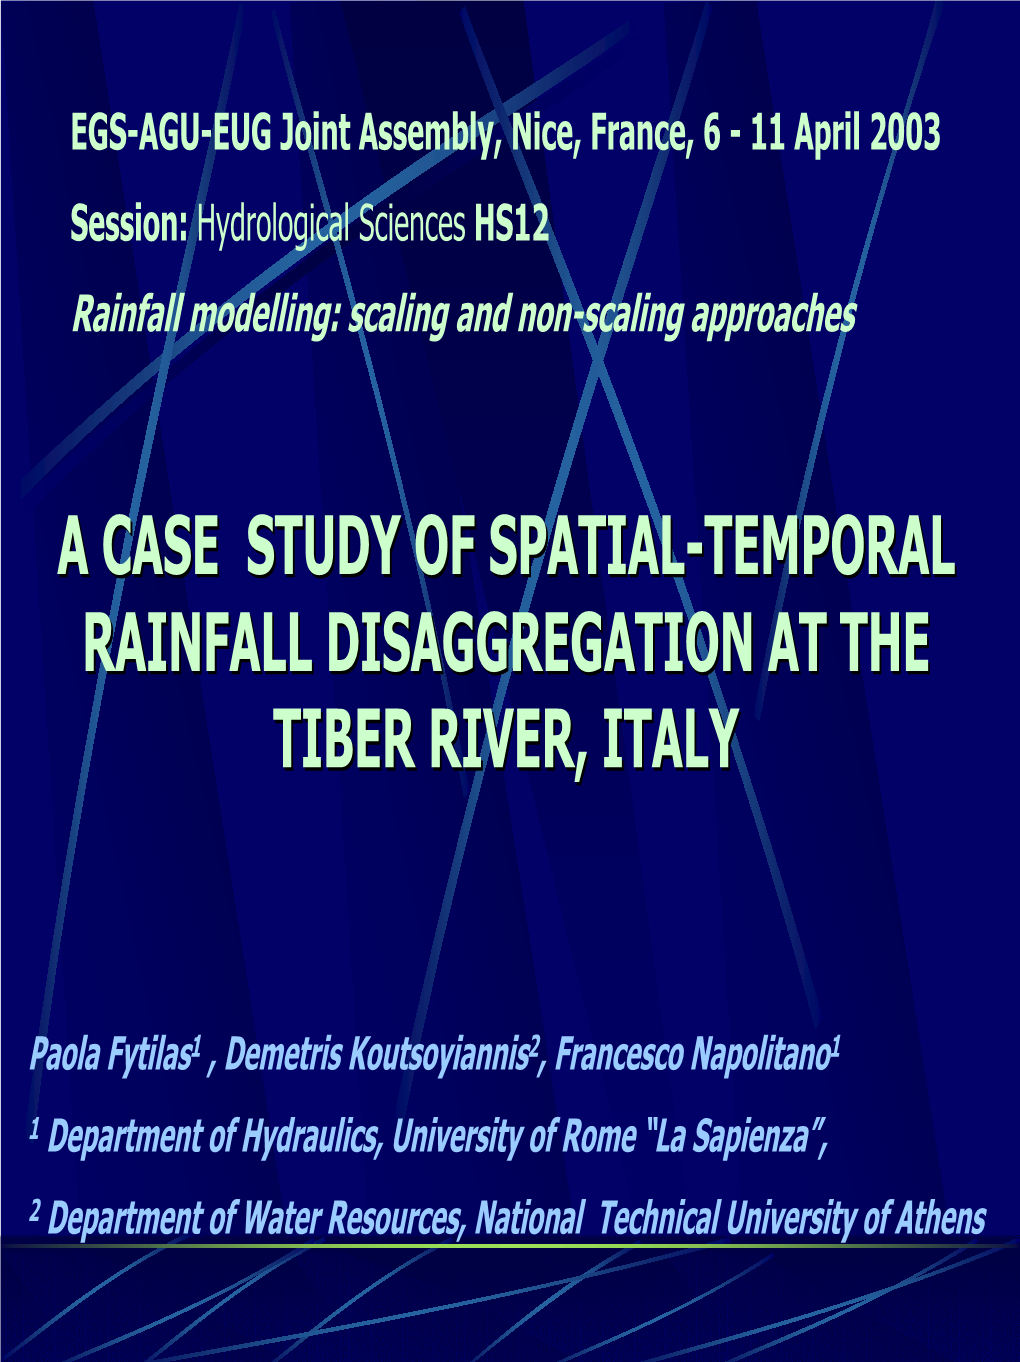 A Case Study of Spatial-Temporal Rainfall Disaggregation at the Tiber River Basin, Italy